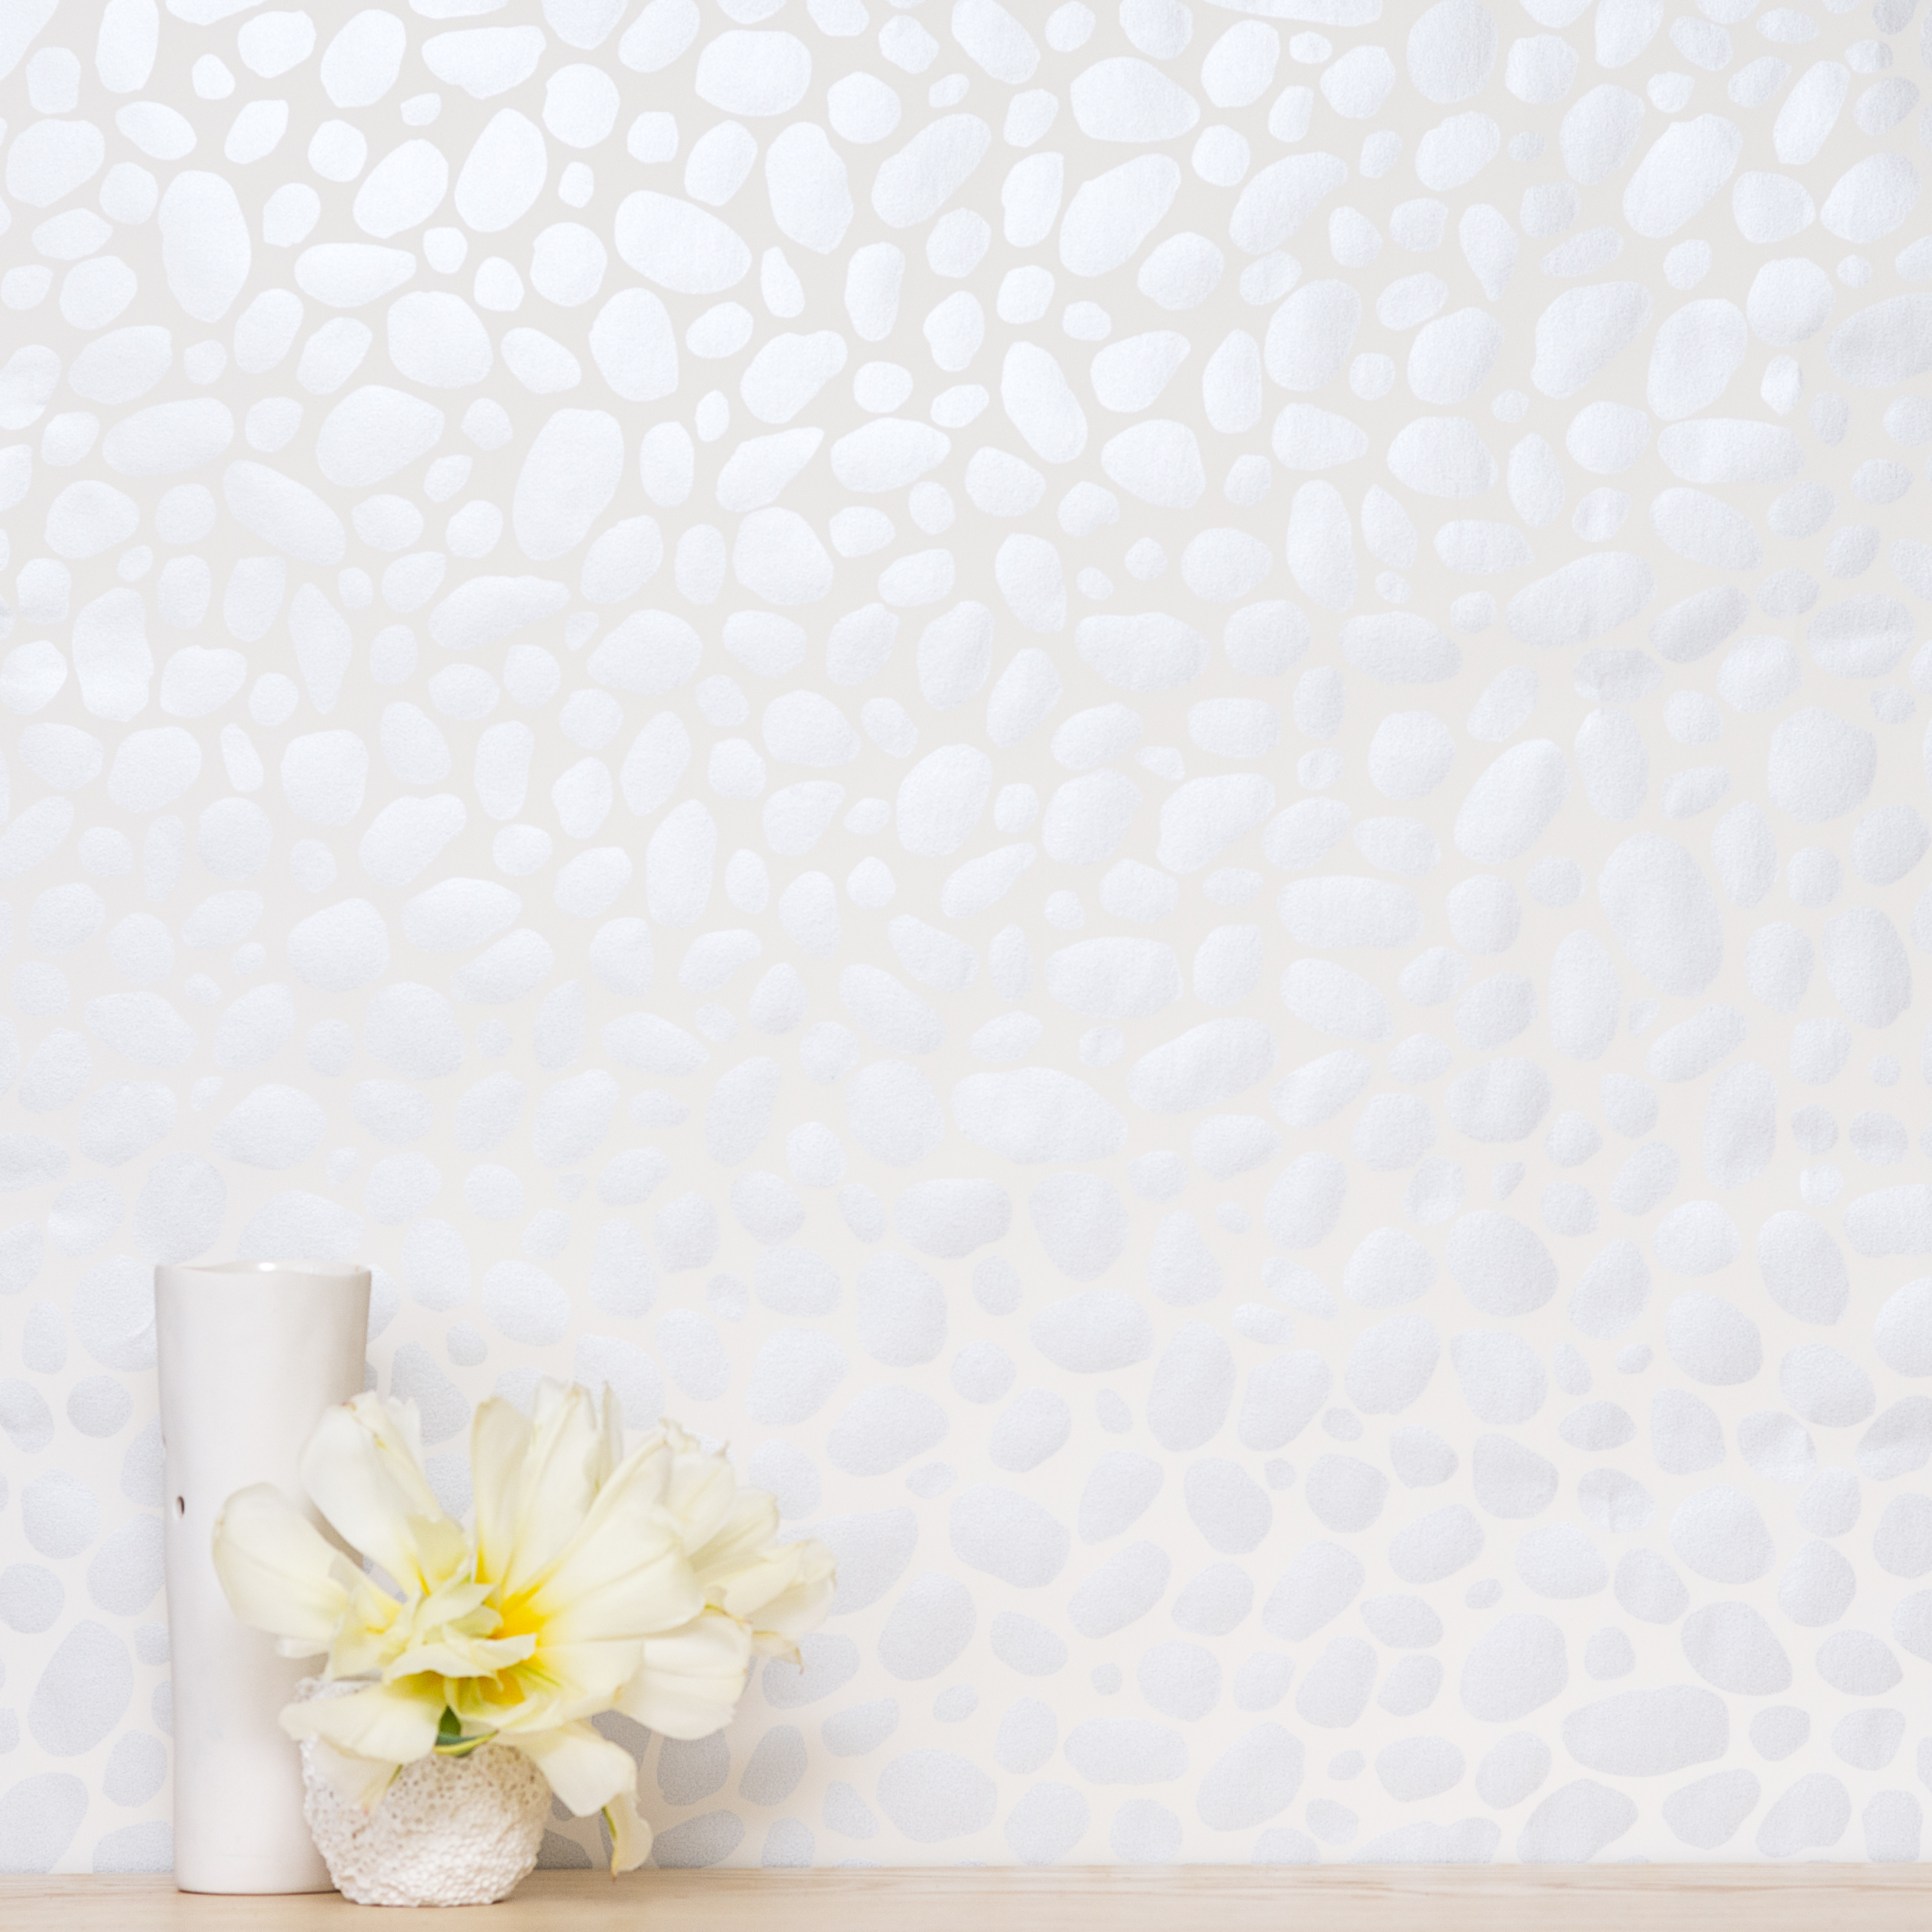 Hoya wallpaper with silver on a cream backdrop from Juju